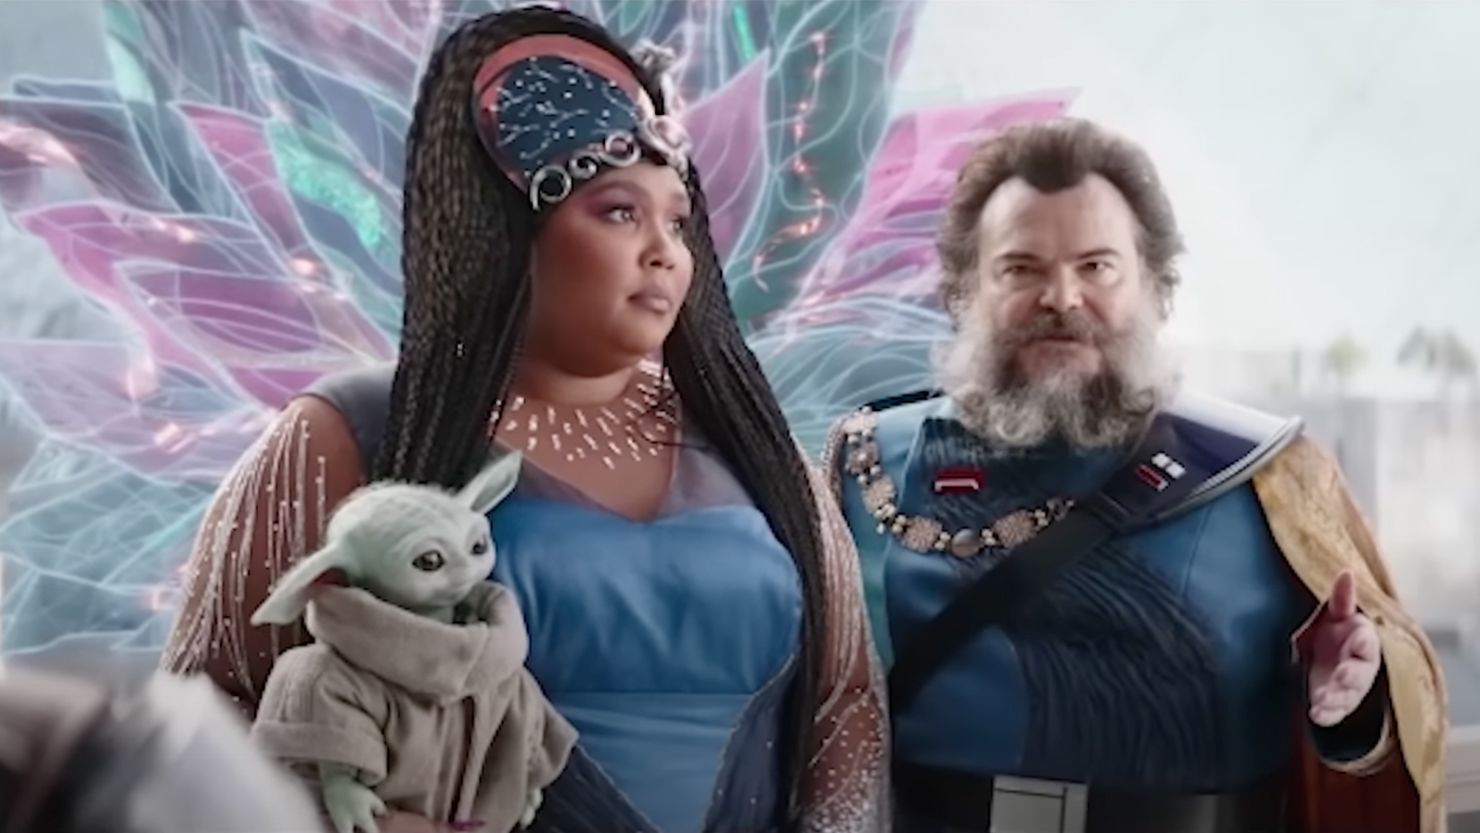 Lizzo and Jack Black made cameo appearances in a new episode of "The Mandalorian" as nobles on an Outer Rim planet. Lizzo's Duchess was smitten with Grogu, as are audiences. 